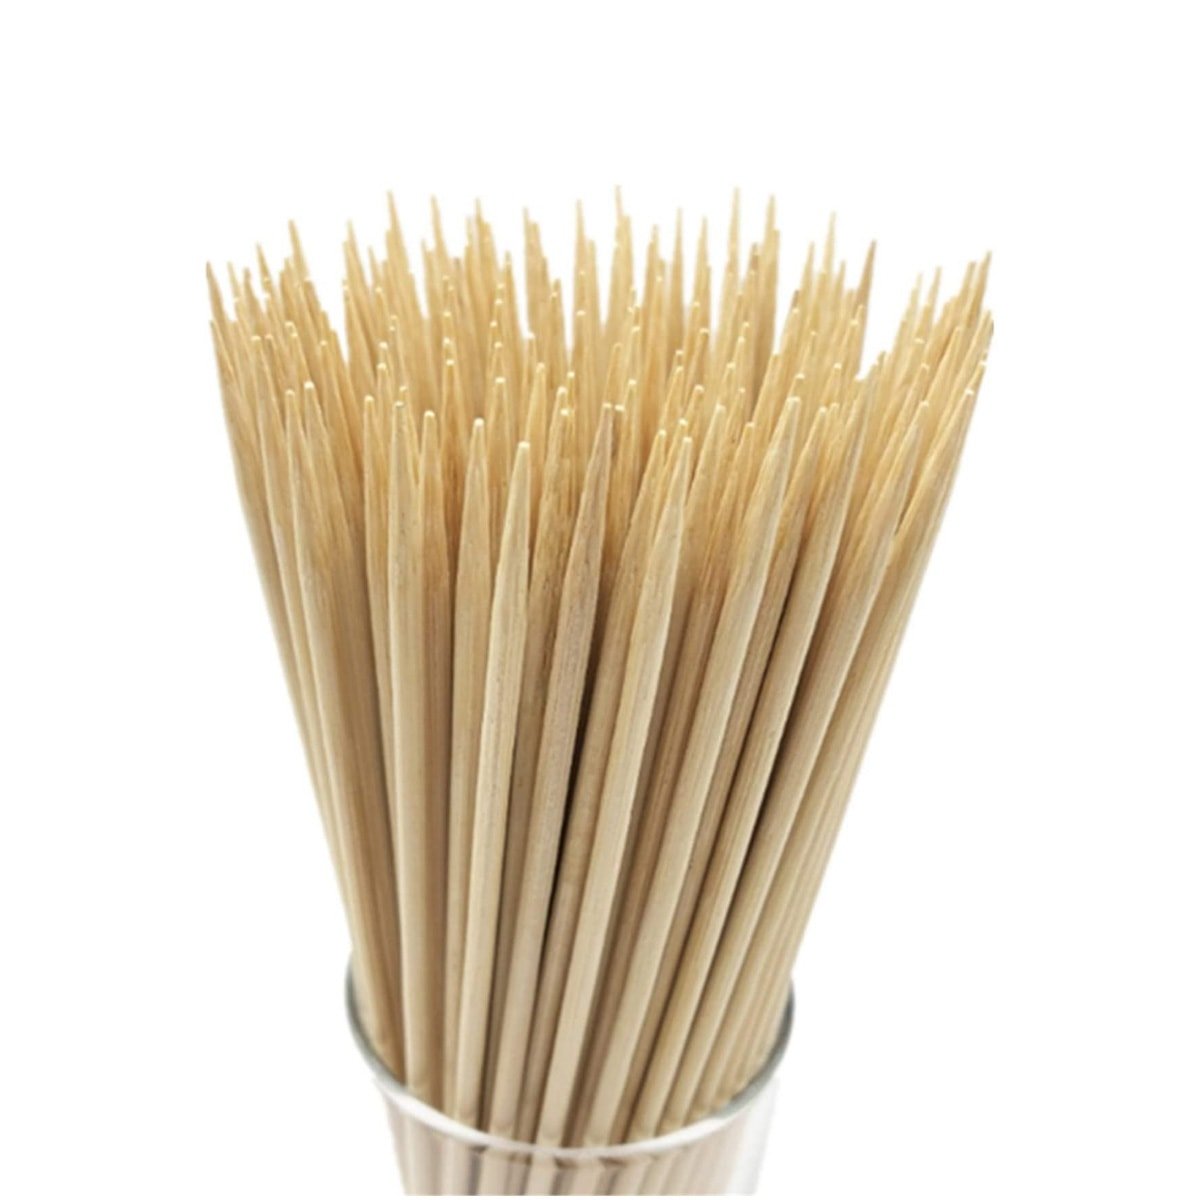 Several bamboo skewers in a glass vase.